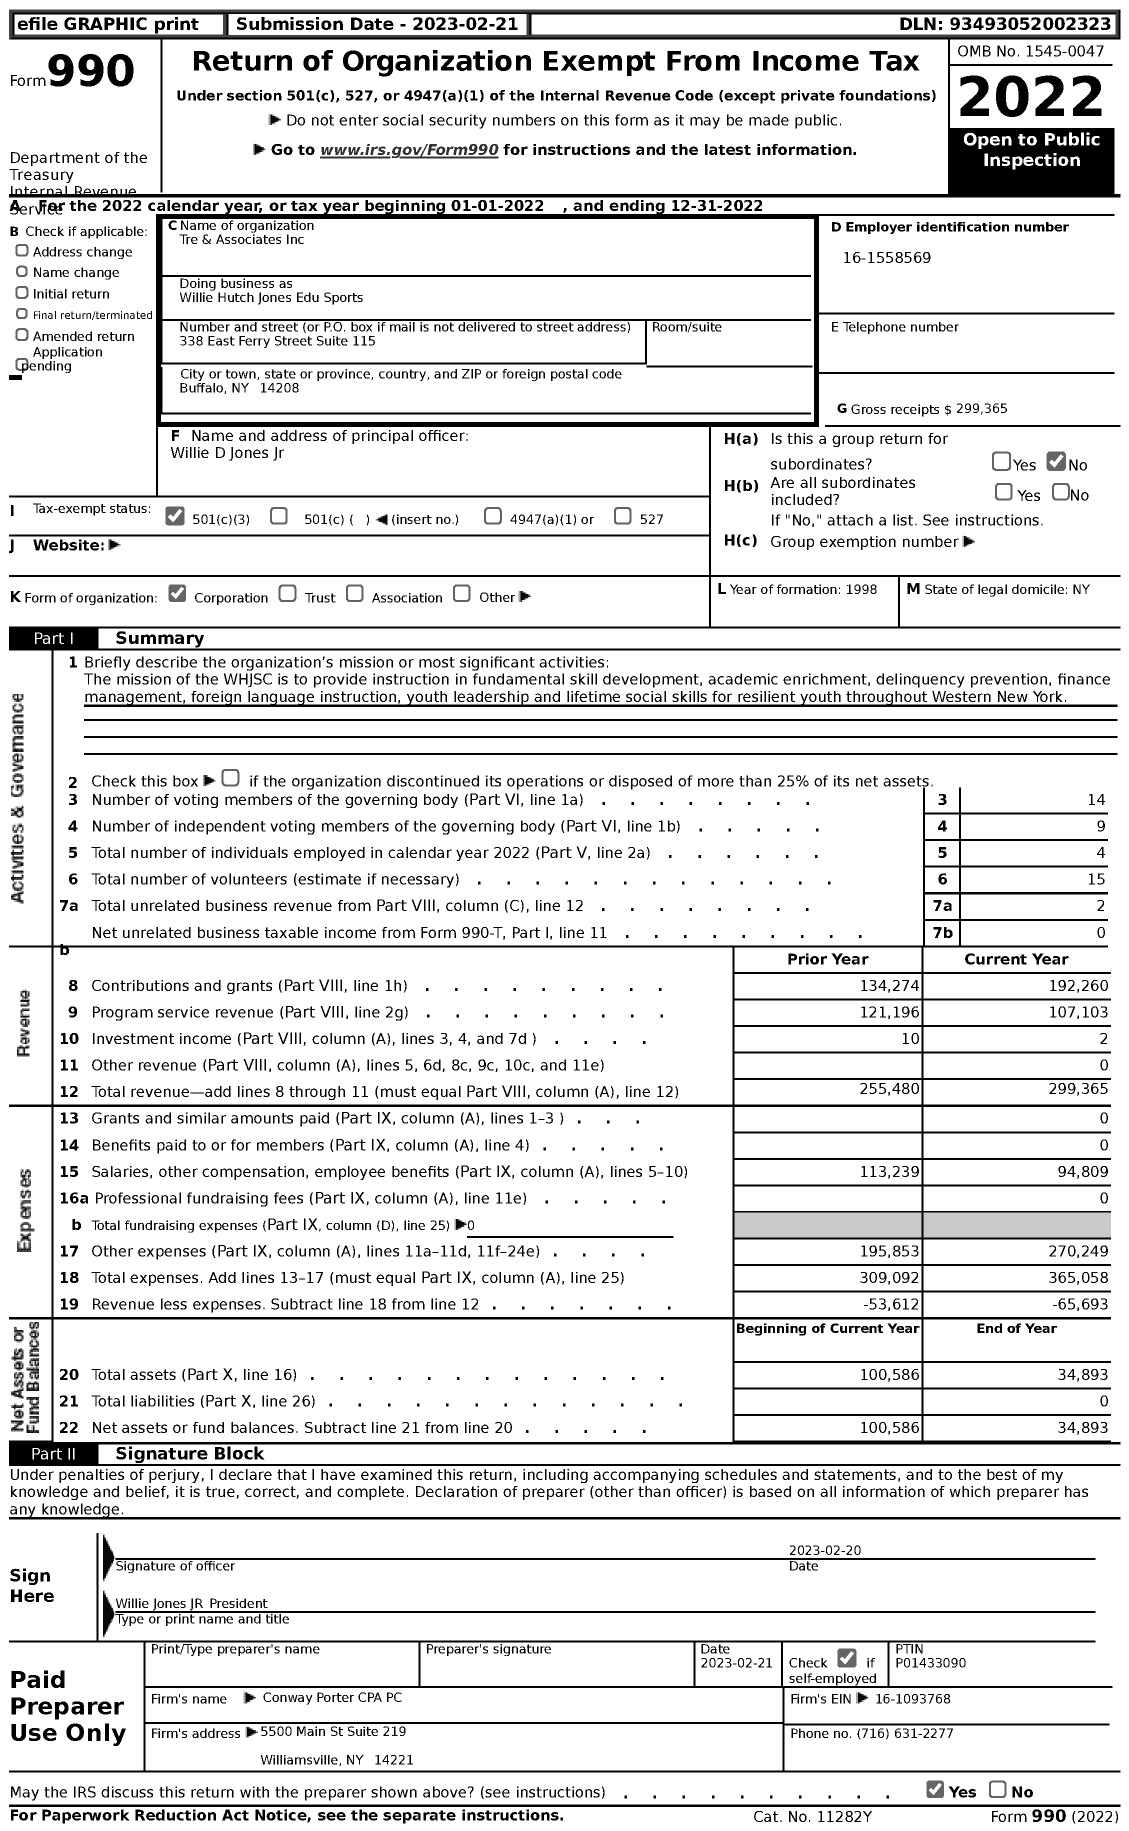 Image of first page of 2022 Form 990 for Willie Hutch Jones Edu Sports